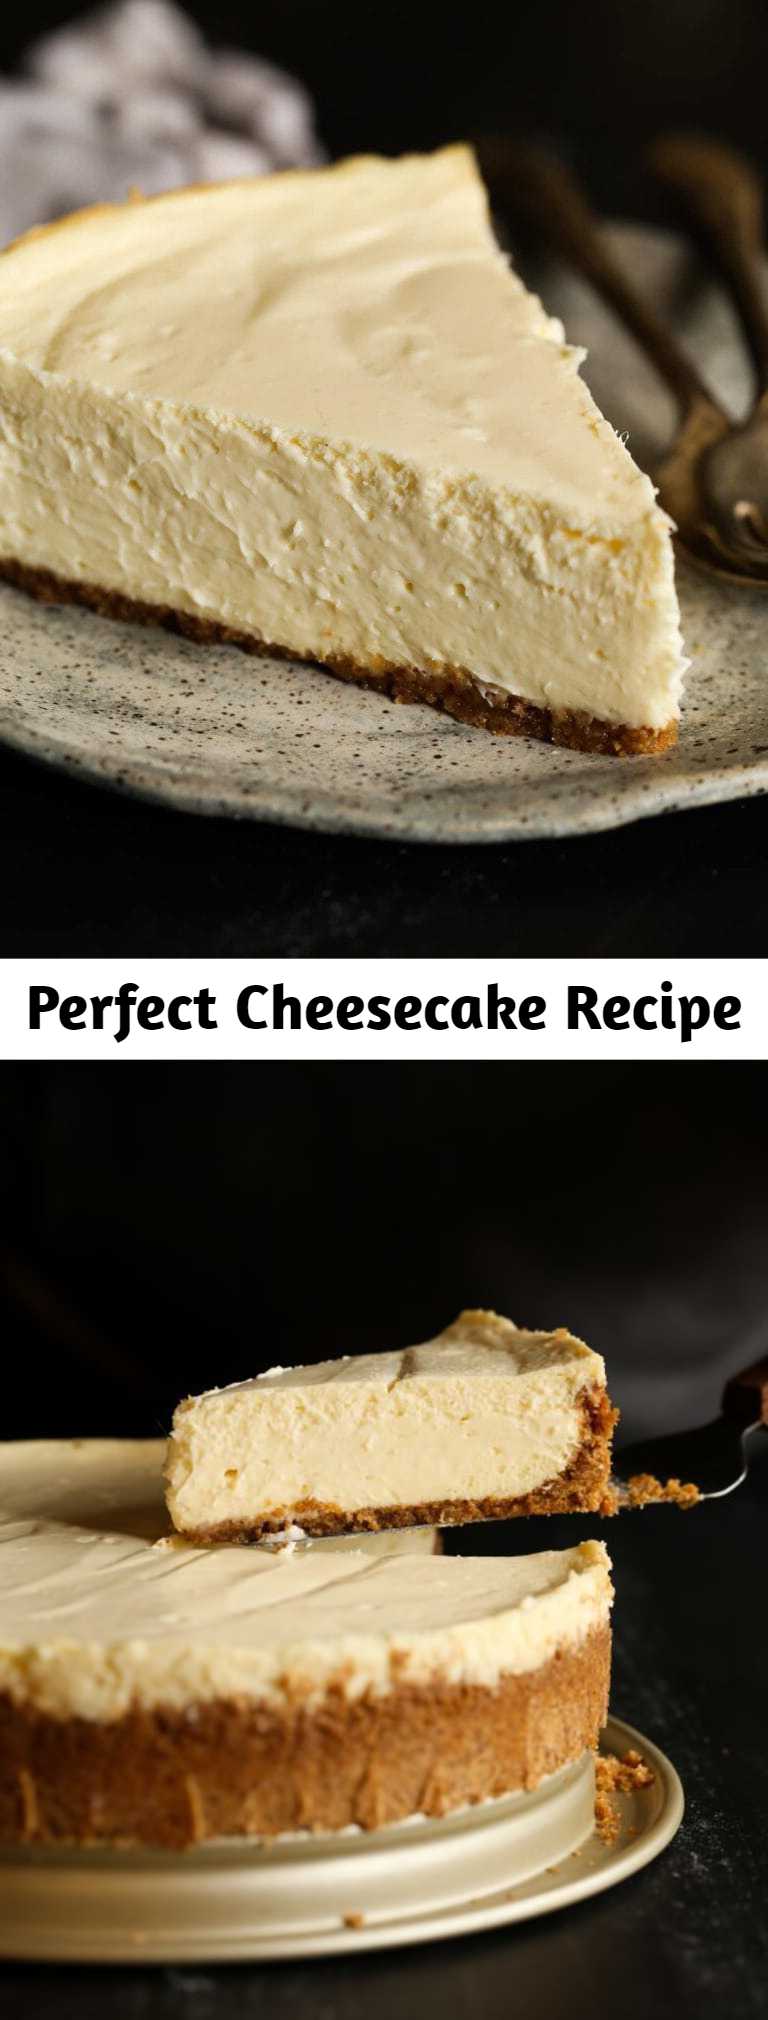 Perfect Cheesecake Recipe - This Classic Cheesecake Recipe makes perfect cheesecake every time! It doesn’t get much better than creamy, smooth cheesecake baked in a homemade graham cracker crust.